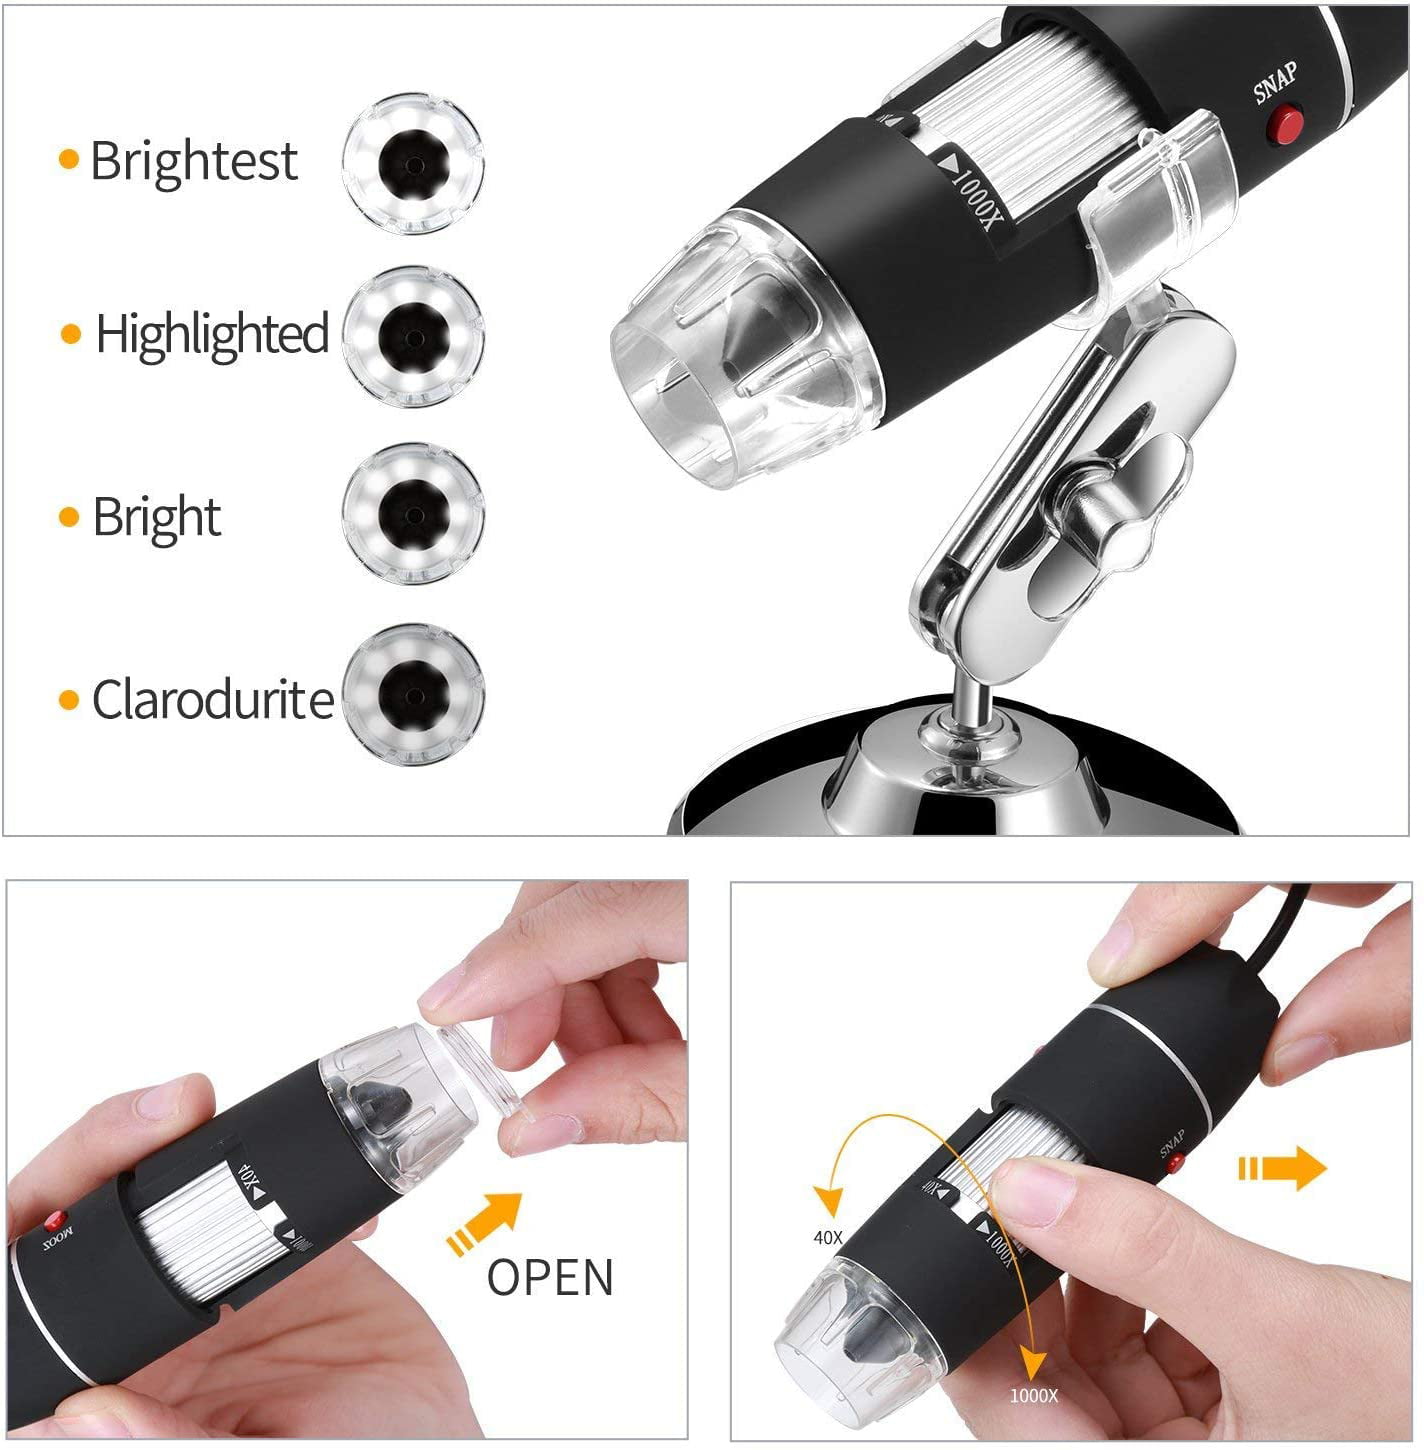 Jiusion WiFi USB Digital Handheld Microscope Compatible with iPhone iPad Mac Window Android Jiusion-WifiMicroscope 40 to 1000x Wireless Magnification Endoscope 8 LED Mini Camera with Phone Suction Metal Stand and Case